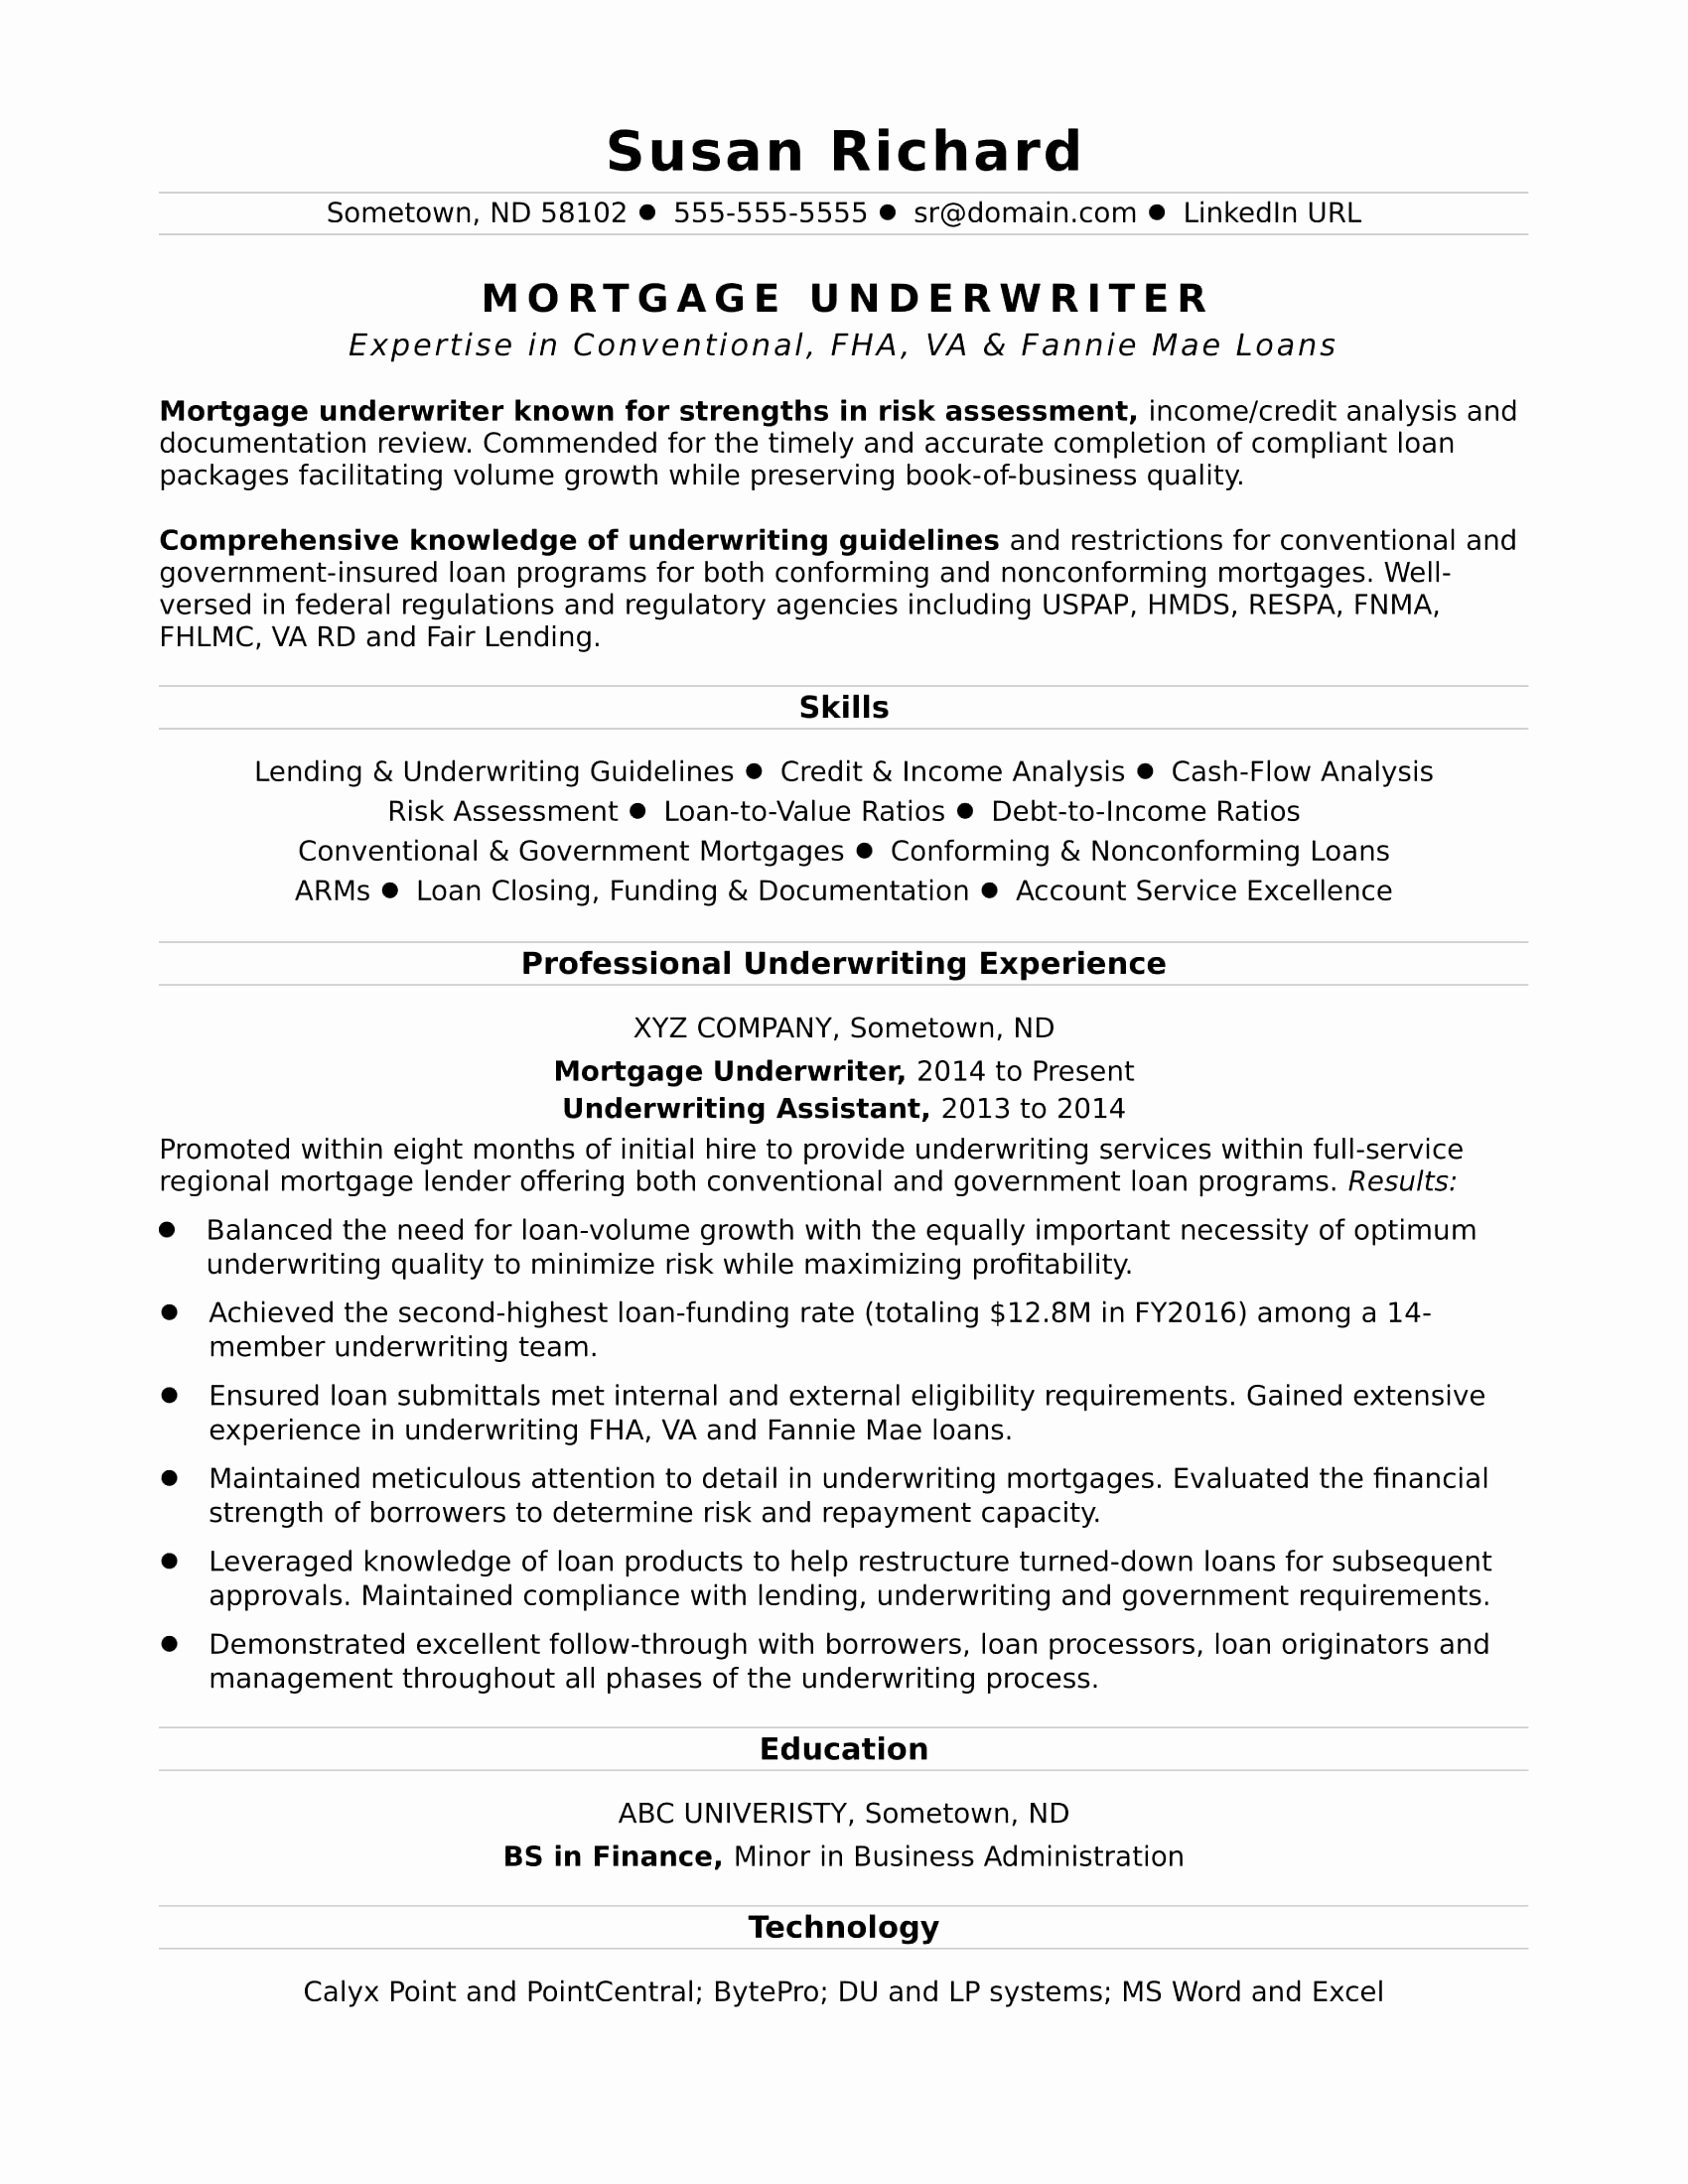 Cover Letter Template Free Download - Free Cover Letter Template Download Unique Free Download Cover